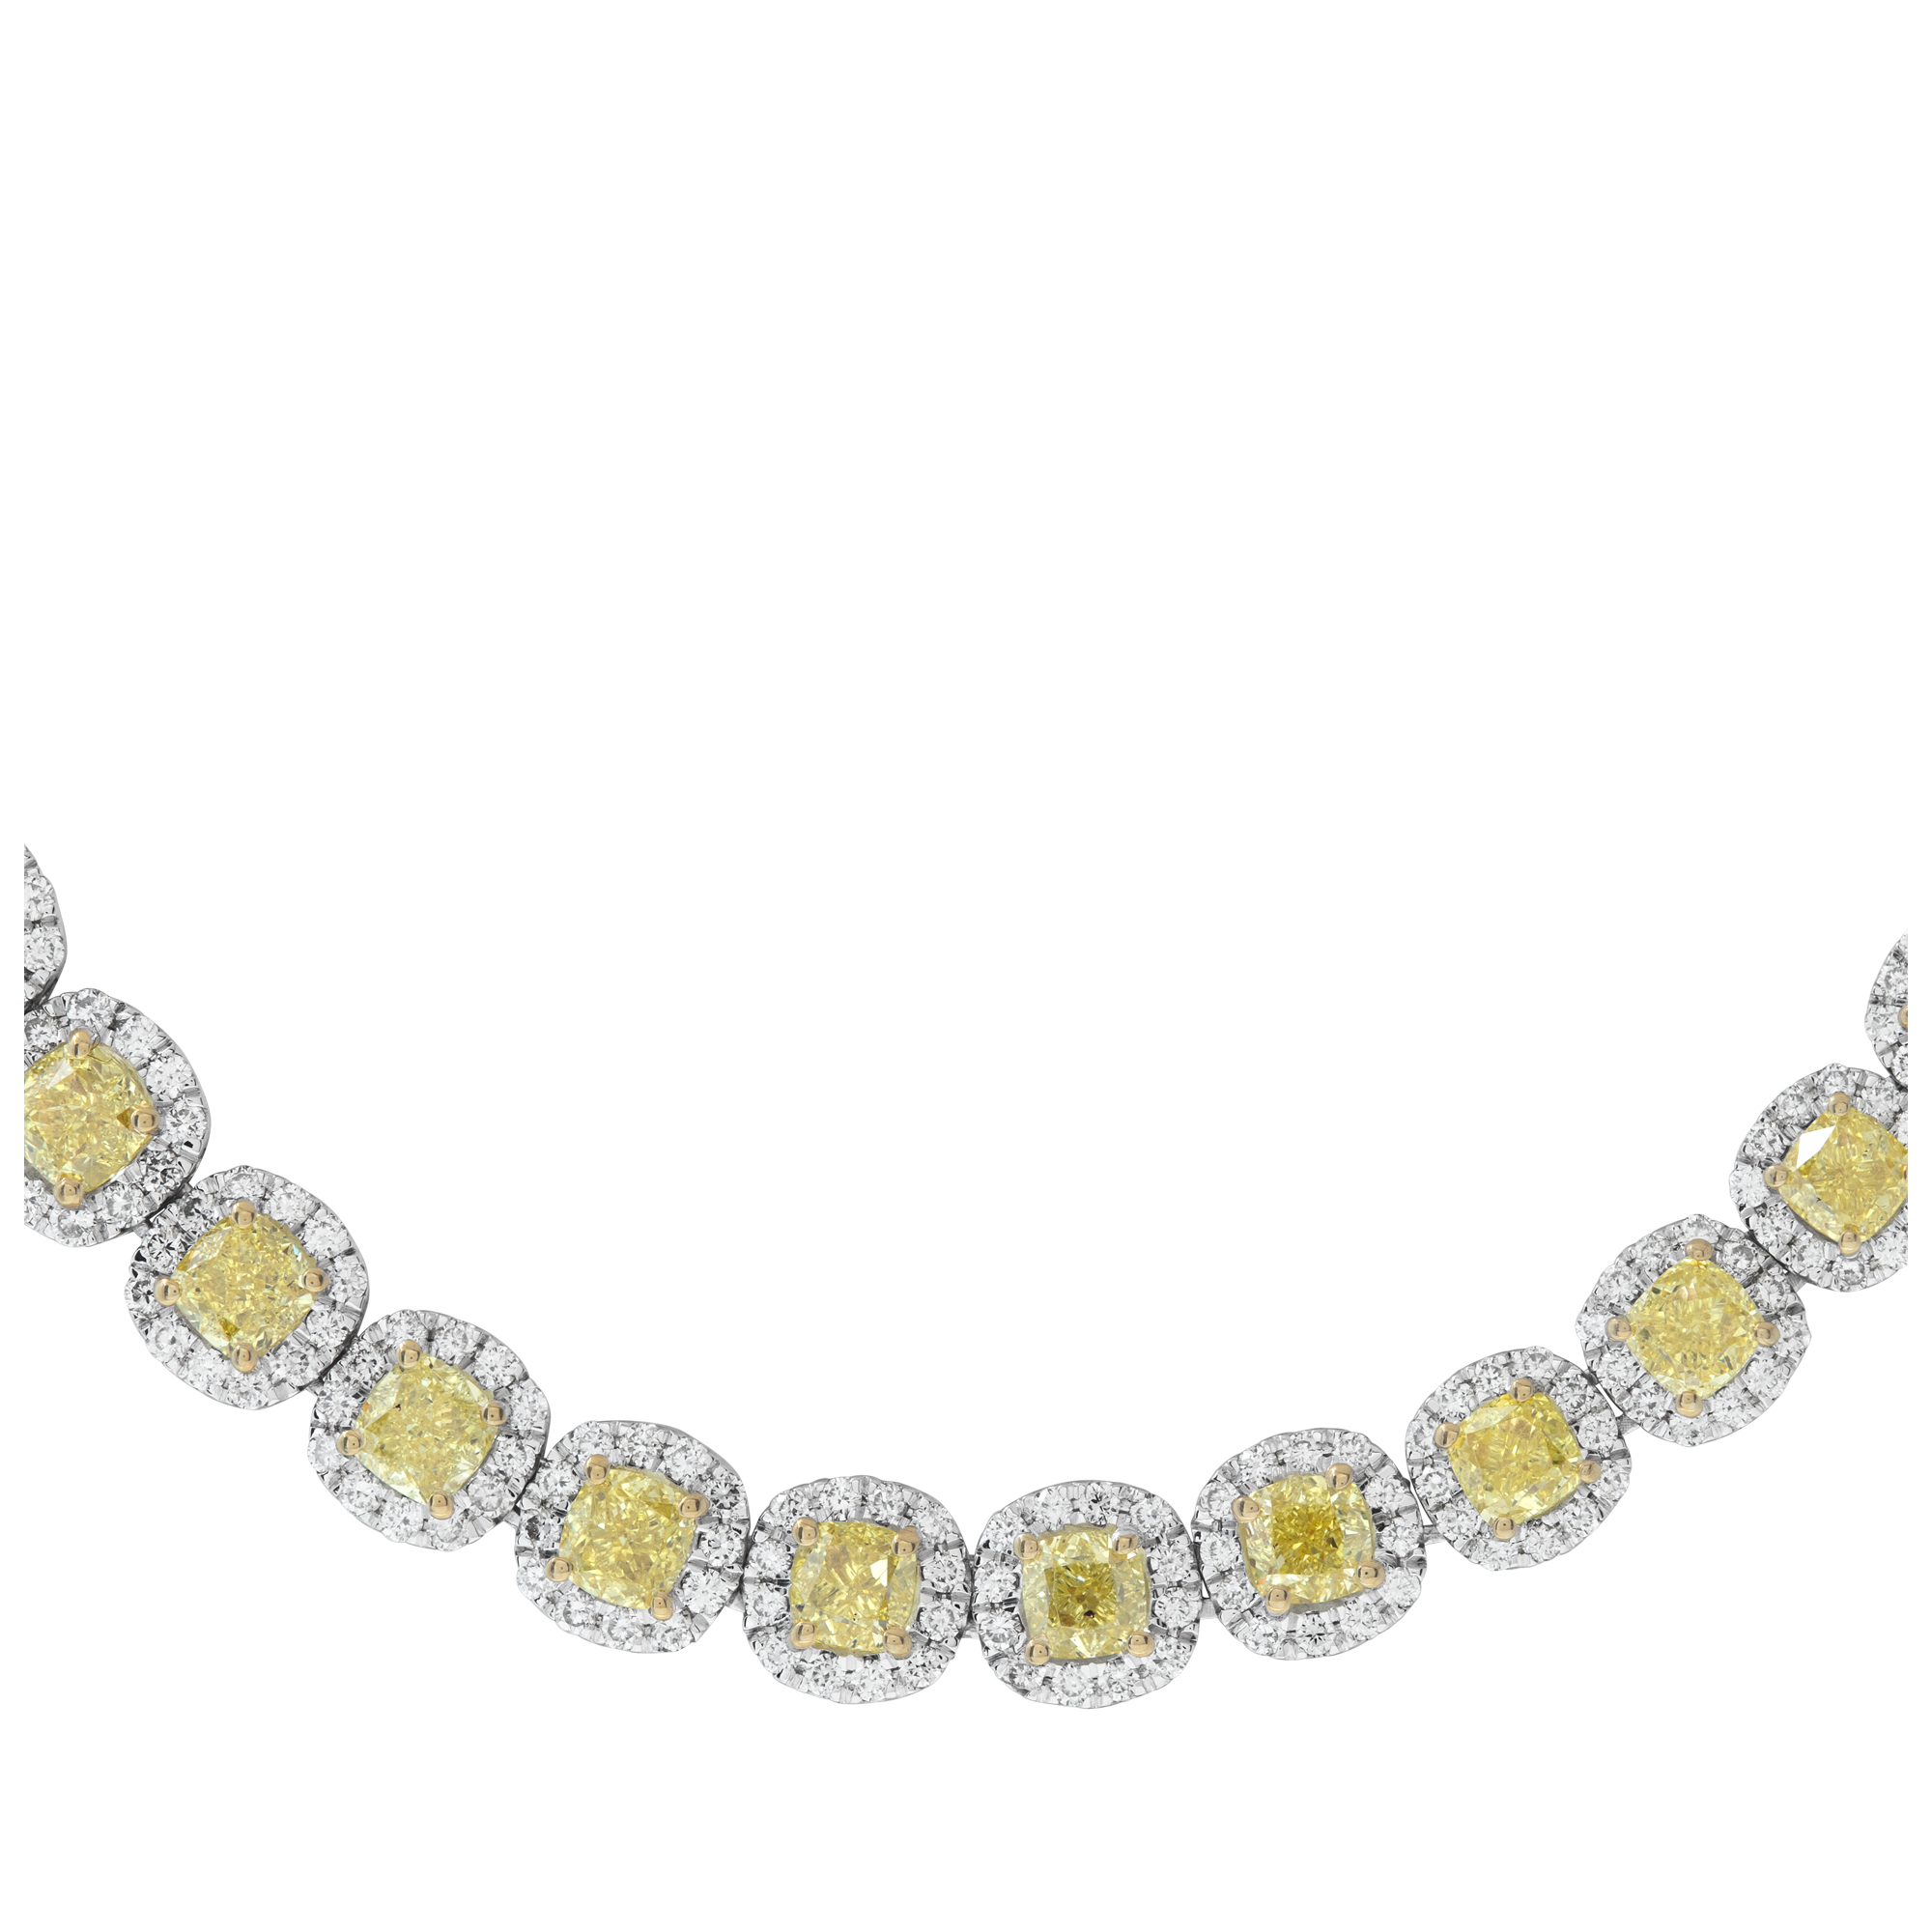 Riviera Necklace With Natural Fancy Yellow & White Diamonds (Over 21.00 Carats) Set In 18k White & Yellow Gold. Gia Certificate For 6 Of The Yellow Cushion Diamonds.